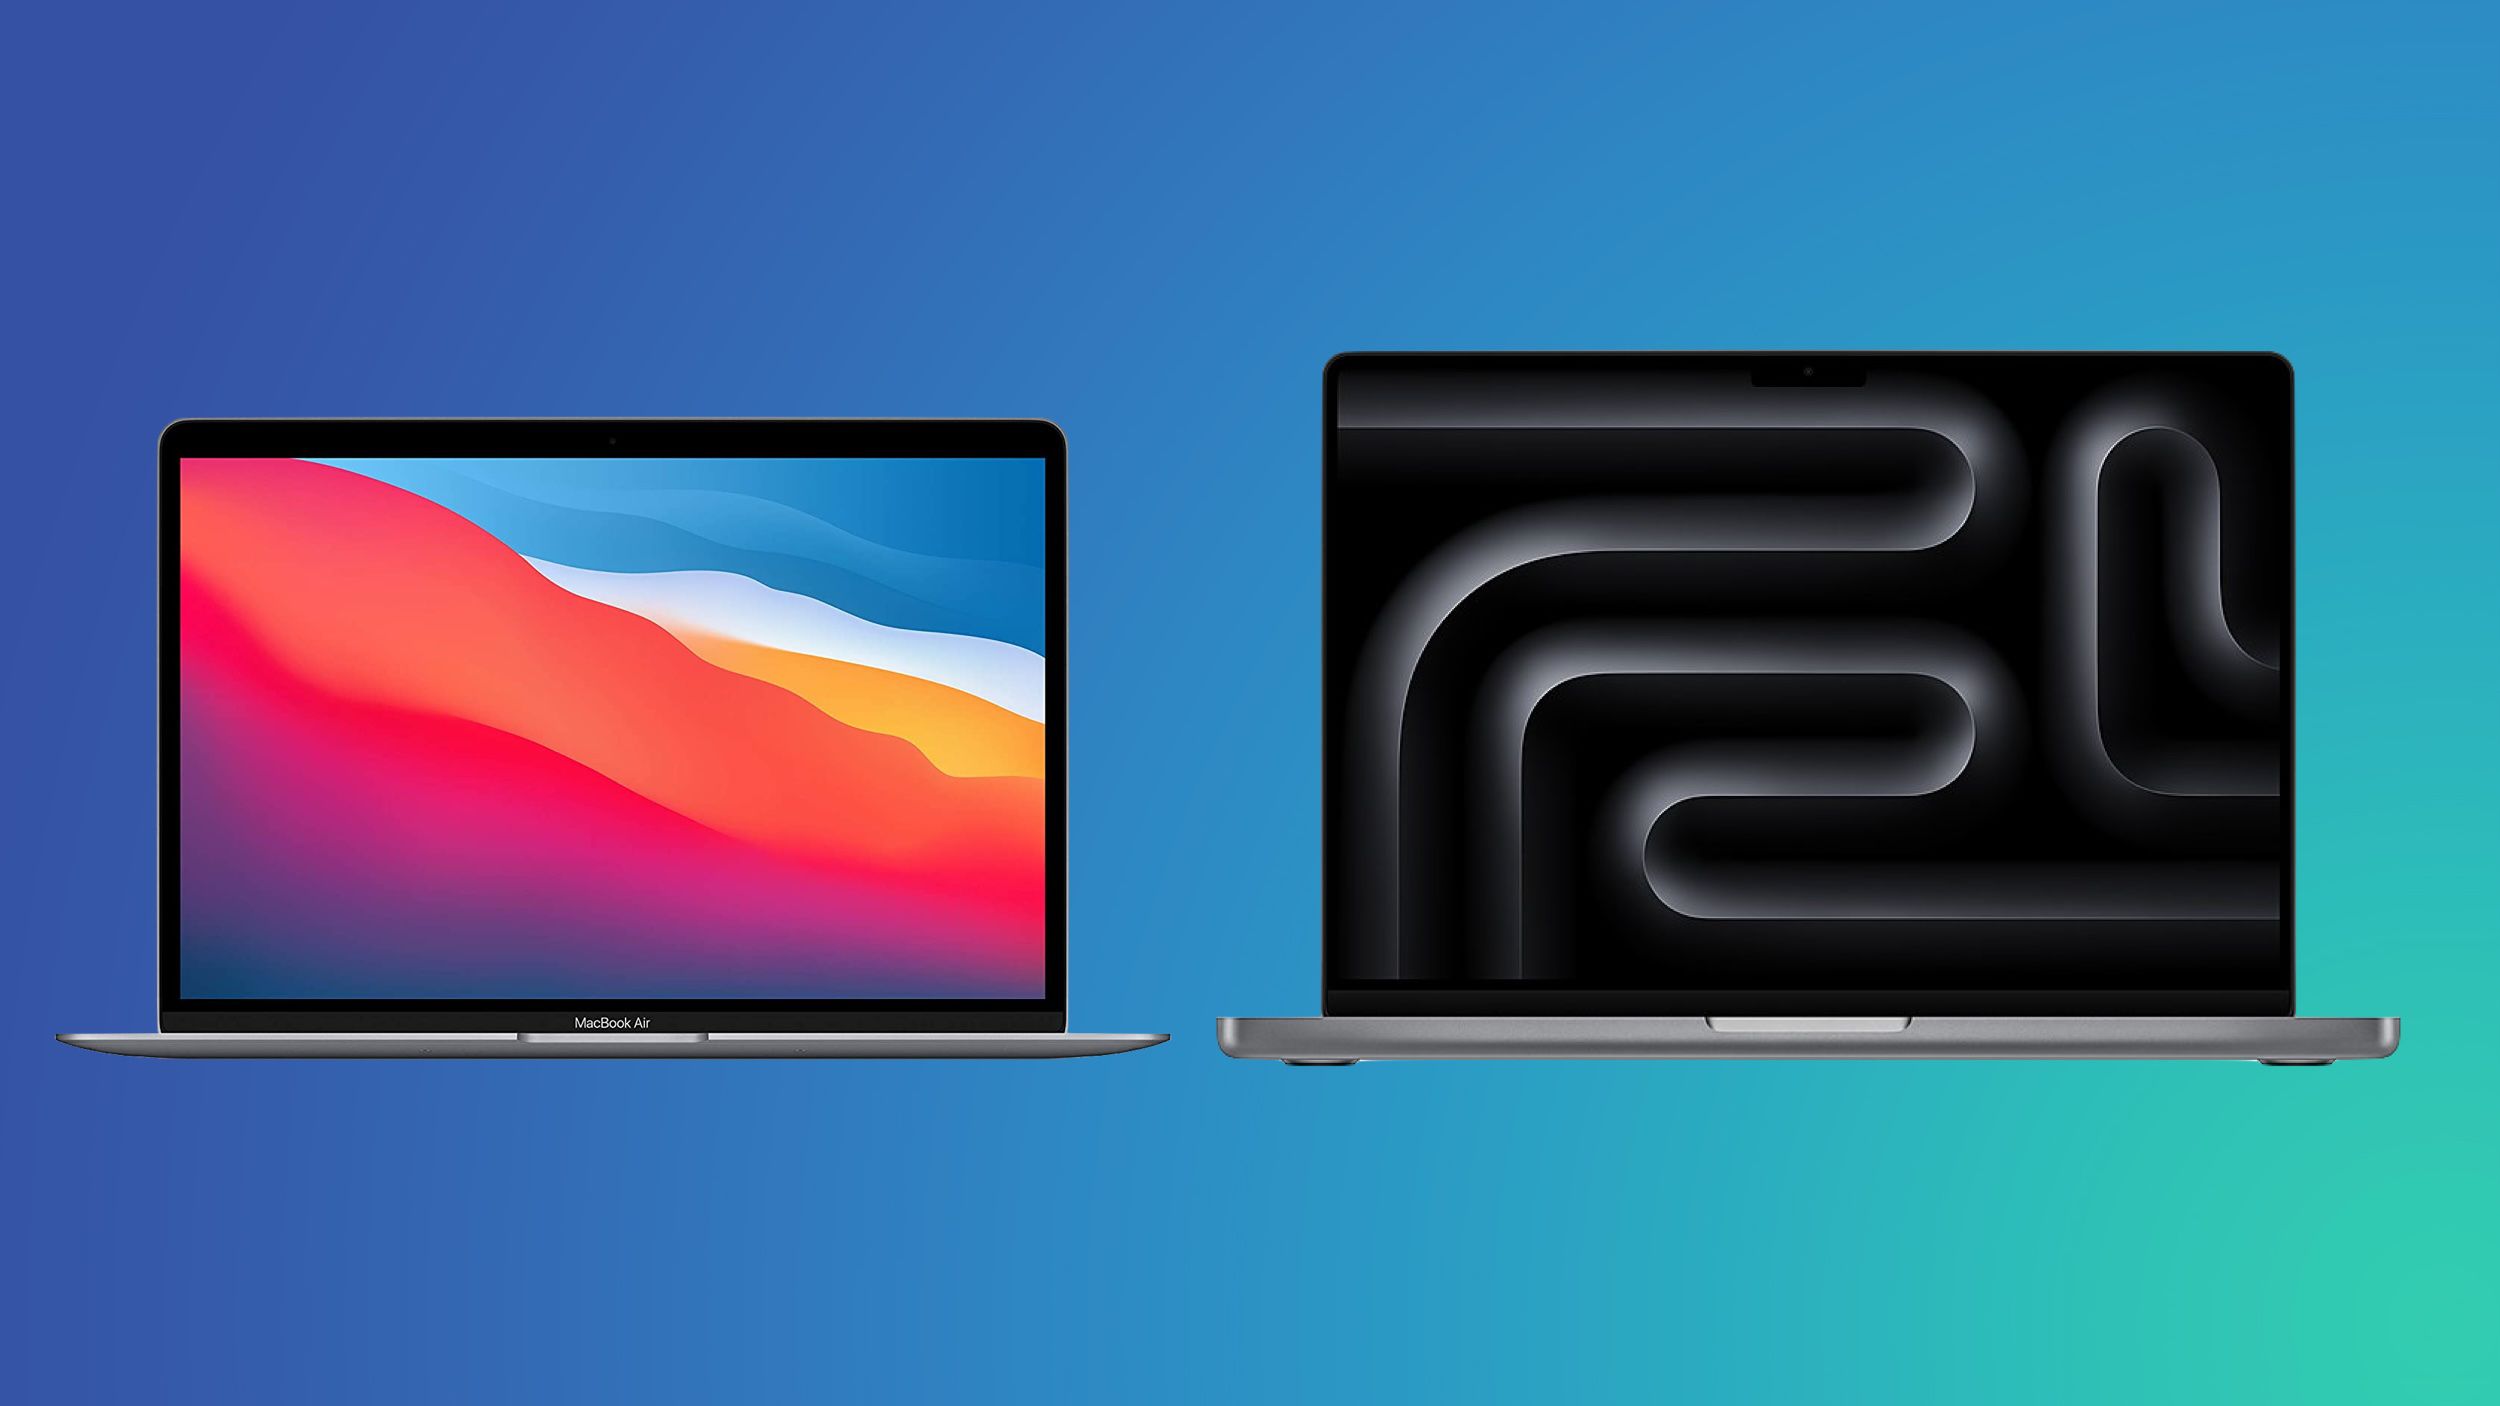 MacBook Air and MacBook Pro Get Multiple Record Low Prices at Best Buy, Save Up to $250 - macrumors.com